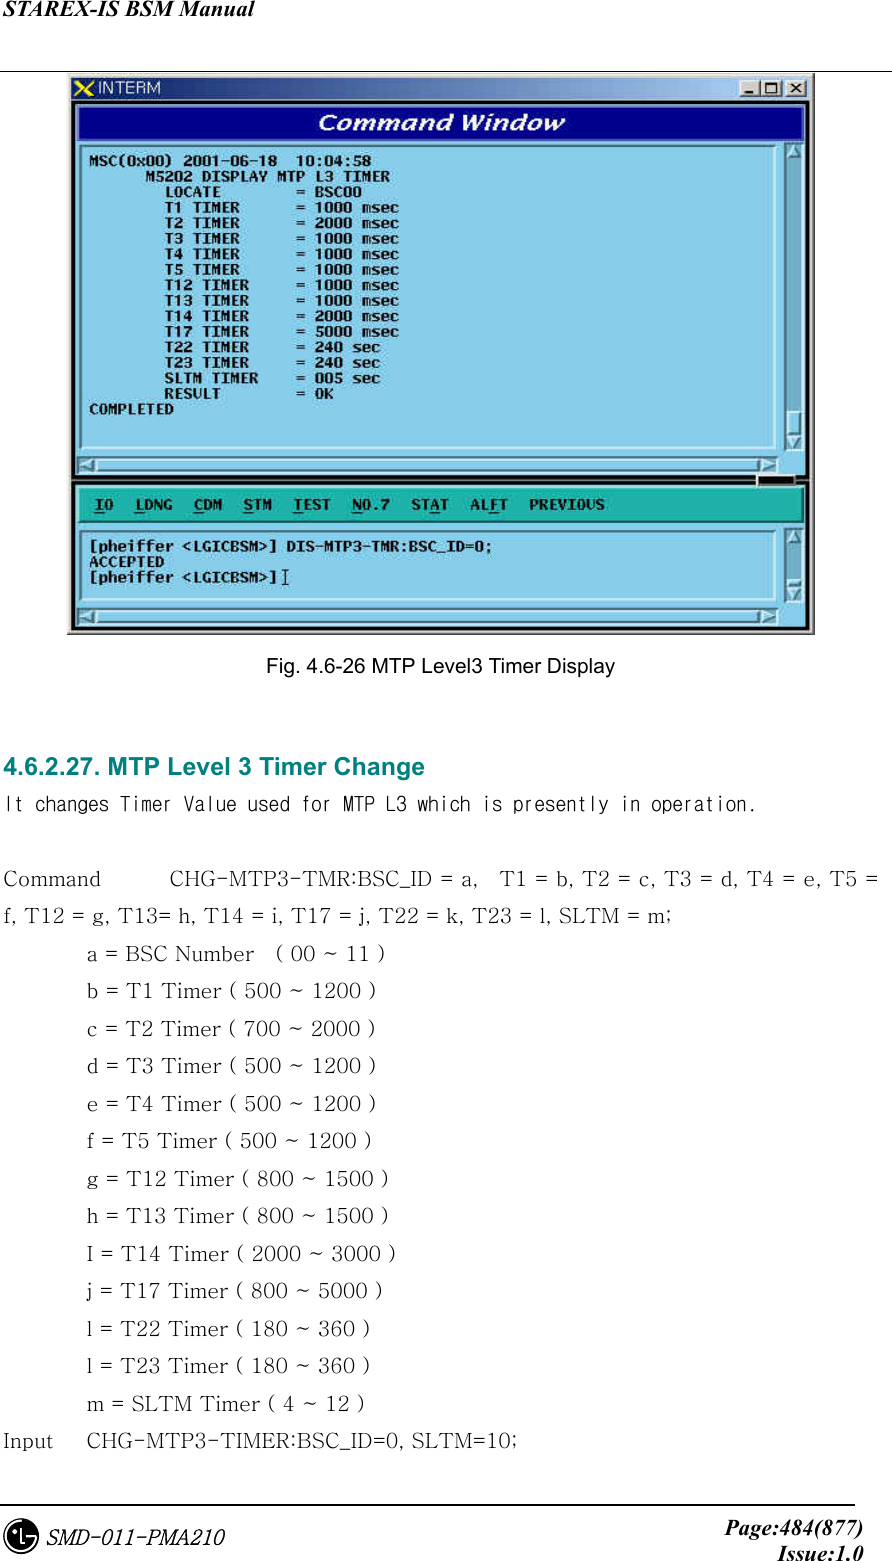 STAREX-IS BSM Manual     Page:484(877)Issue:1.0SMD-011-PMA210  Fig. 4.6-26 MTP Level3 Timer Display  4.6.2.27. MTP Level 3 Timer Change It changes Timer Value used for MTP L3 which is presently in operation.  Command  CHG-MTP3-TMR:BSC_ID = a,    T1 = b, T2 = c, T3 = d, T4 = e, T5 = f, T12 = g, T13= h, T14 = i, T17 = j, T22 = k, T23 = l, SLTM = m;   a = BSC Number    ( 00 ~ 11 )   b = T1 Timer ( 500 ~ 1200 )   c = T2 Timer ( 700 ~ 2000 )   d = T3 Timer ( 500 ~ 1200 )   e = T4 Timer ( 500 ~ 1200 )   f = T5 Timer ( 500 ~ 1200 )   g = T12 Timer ( 800 ~ 1500 )   h = T13 Timer ( 800 ~ 1500 )   I = T14 Timer ( 2000 ~ 3000 )   j = T17 Timer ( 800 ~ 5000 )   l = T22 Timer ( 180 ~ 360 )   l = T23 Timer ( 180 ~ 360 )   m = SLTM Timer ( 4 ~ 12 ) Input  CHG-MTP3-TIMER:BSC_ID=0, SLTM=10; 